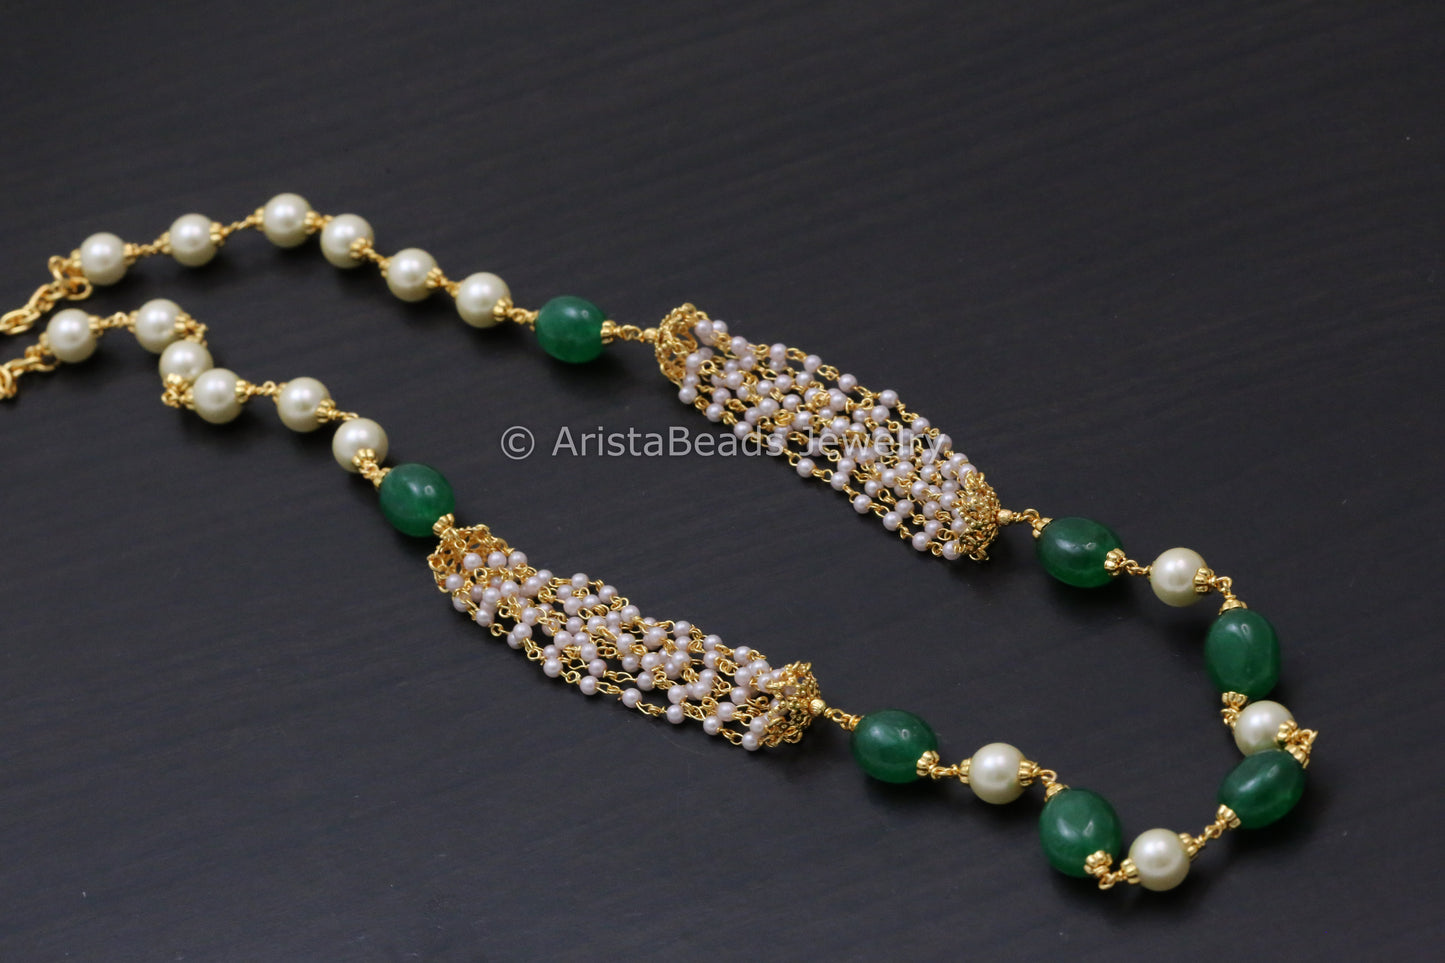 Emerald Color Beads & Pearl Necklace